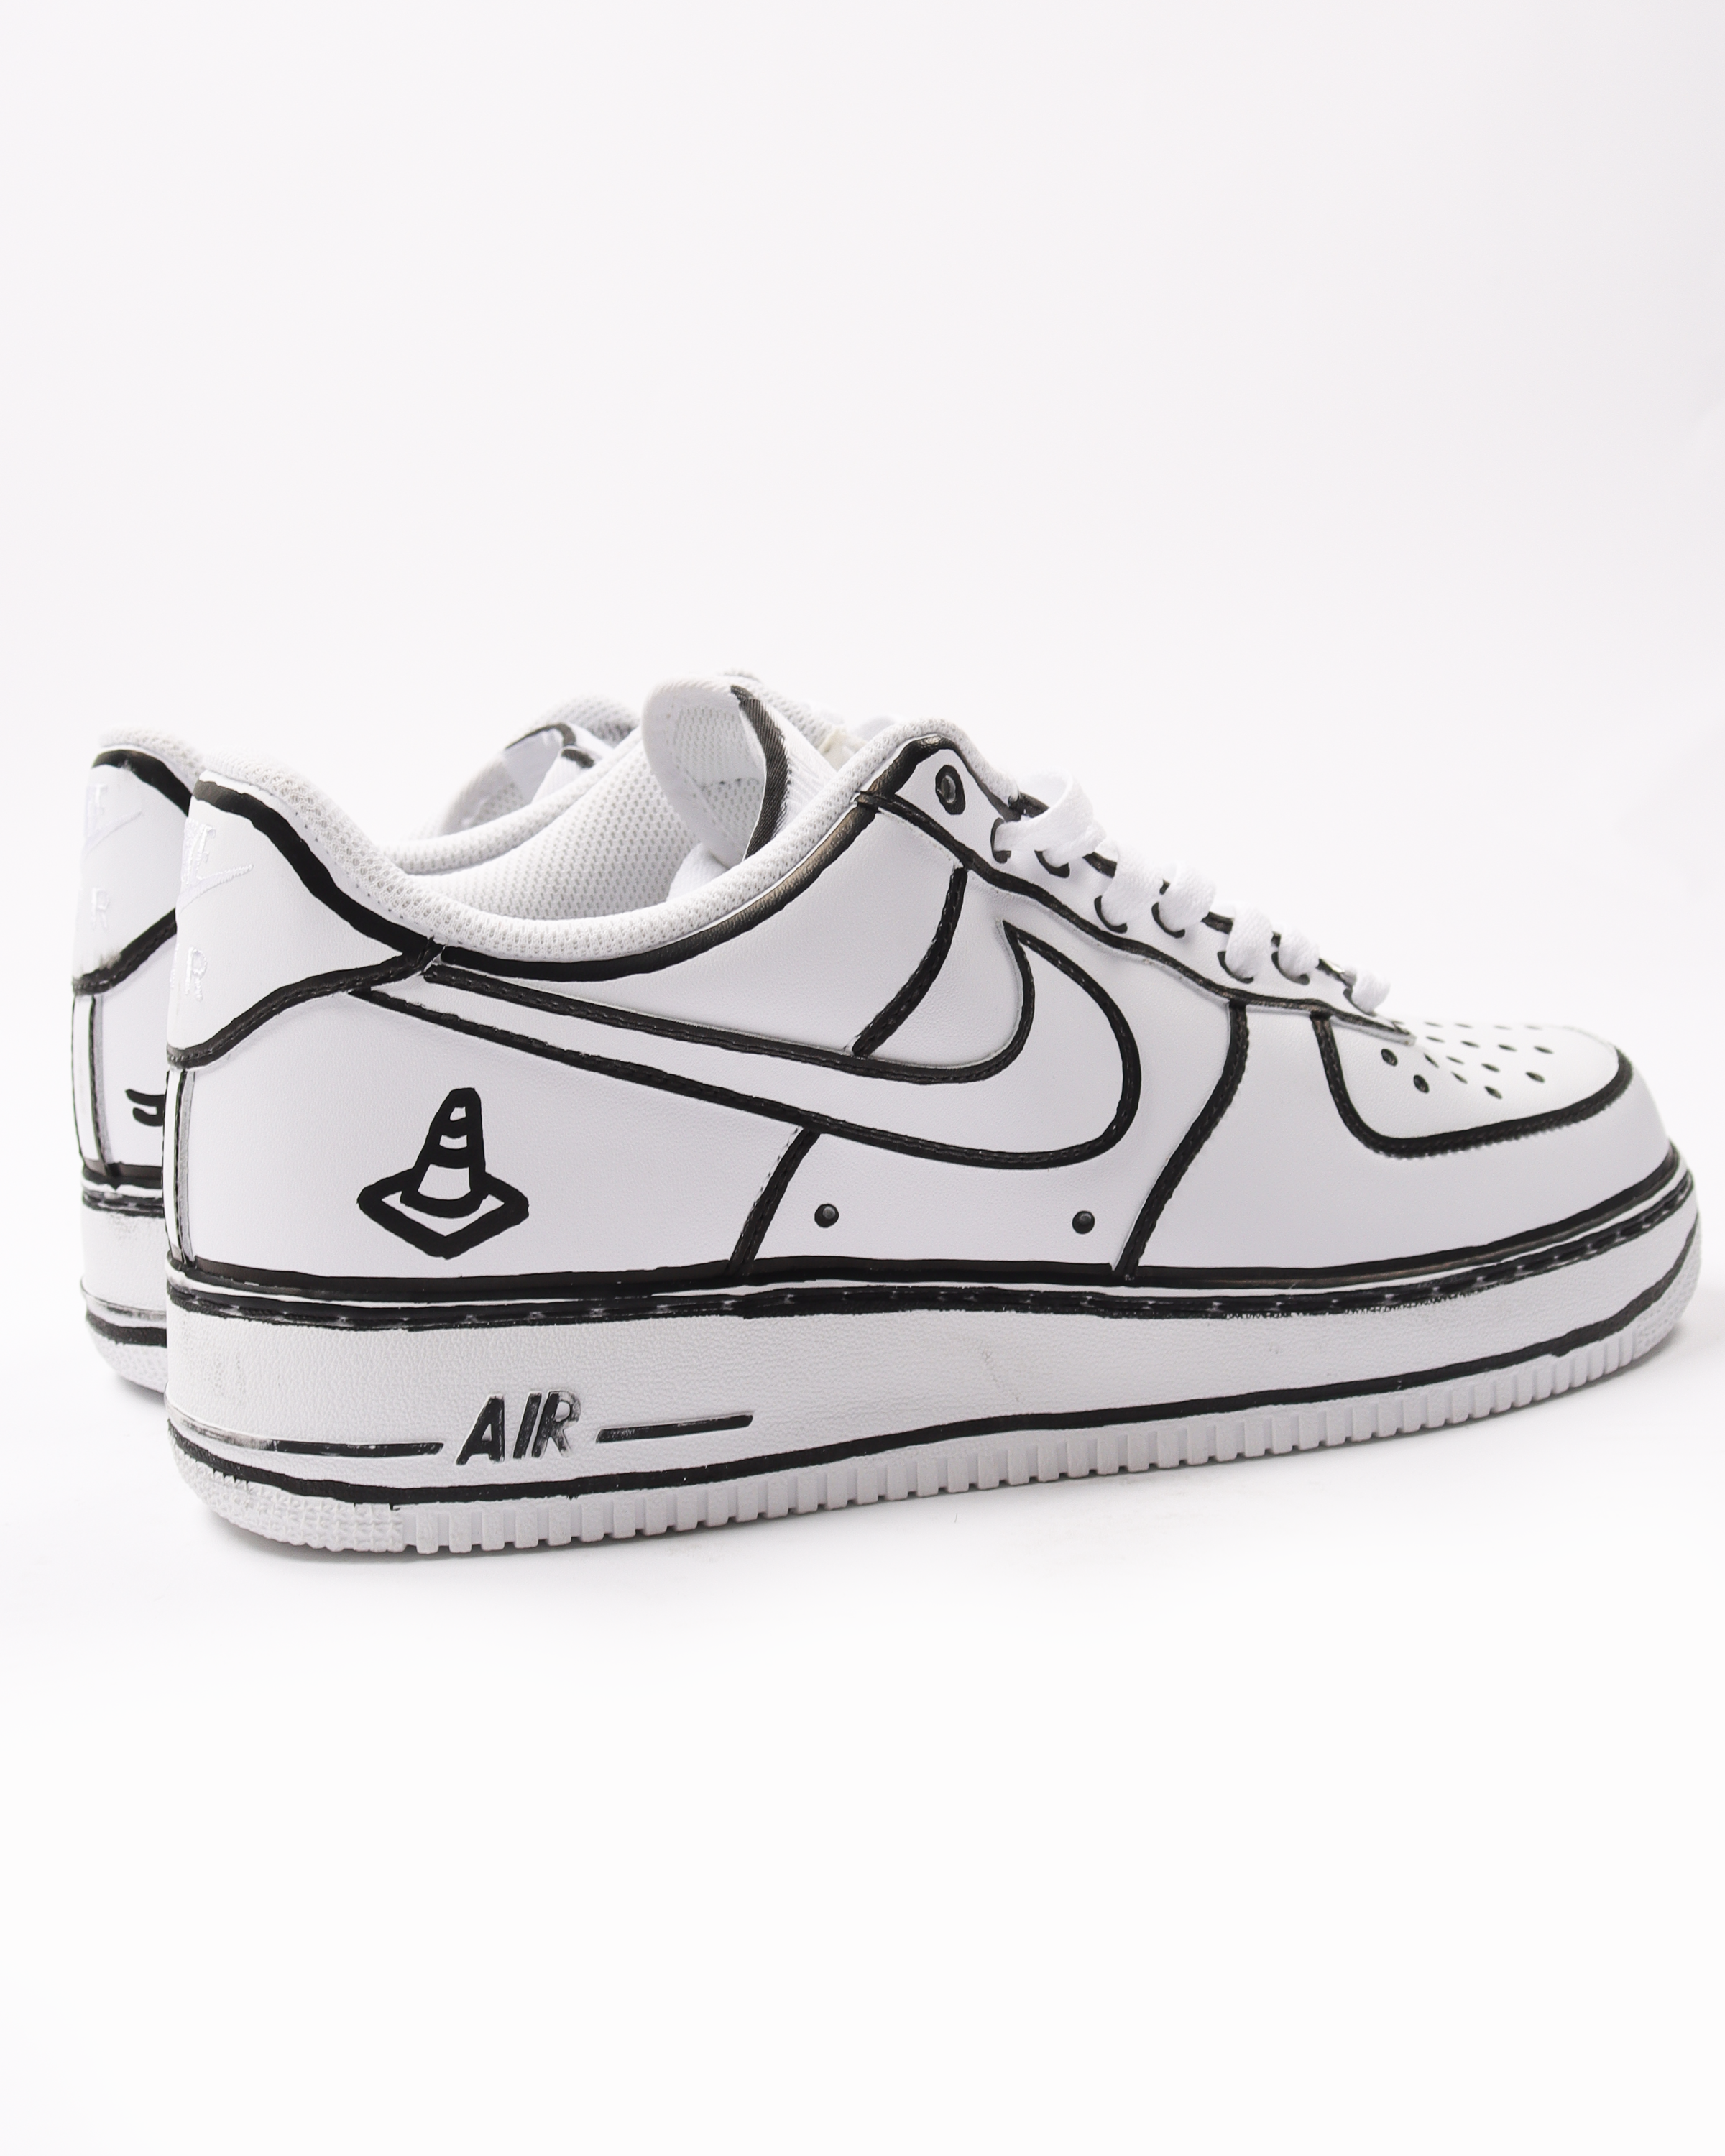 Air Force 1 by Joshua Vides Giveaway